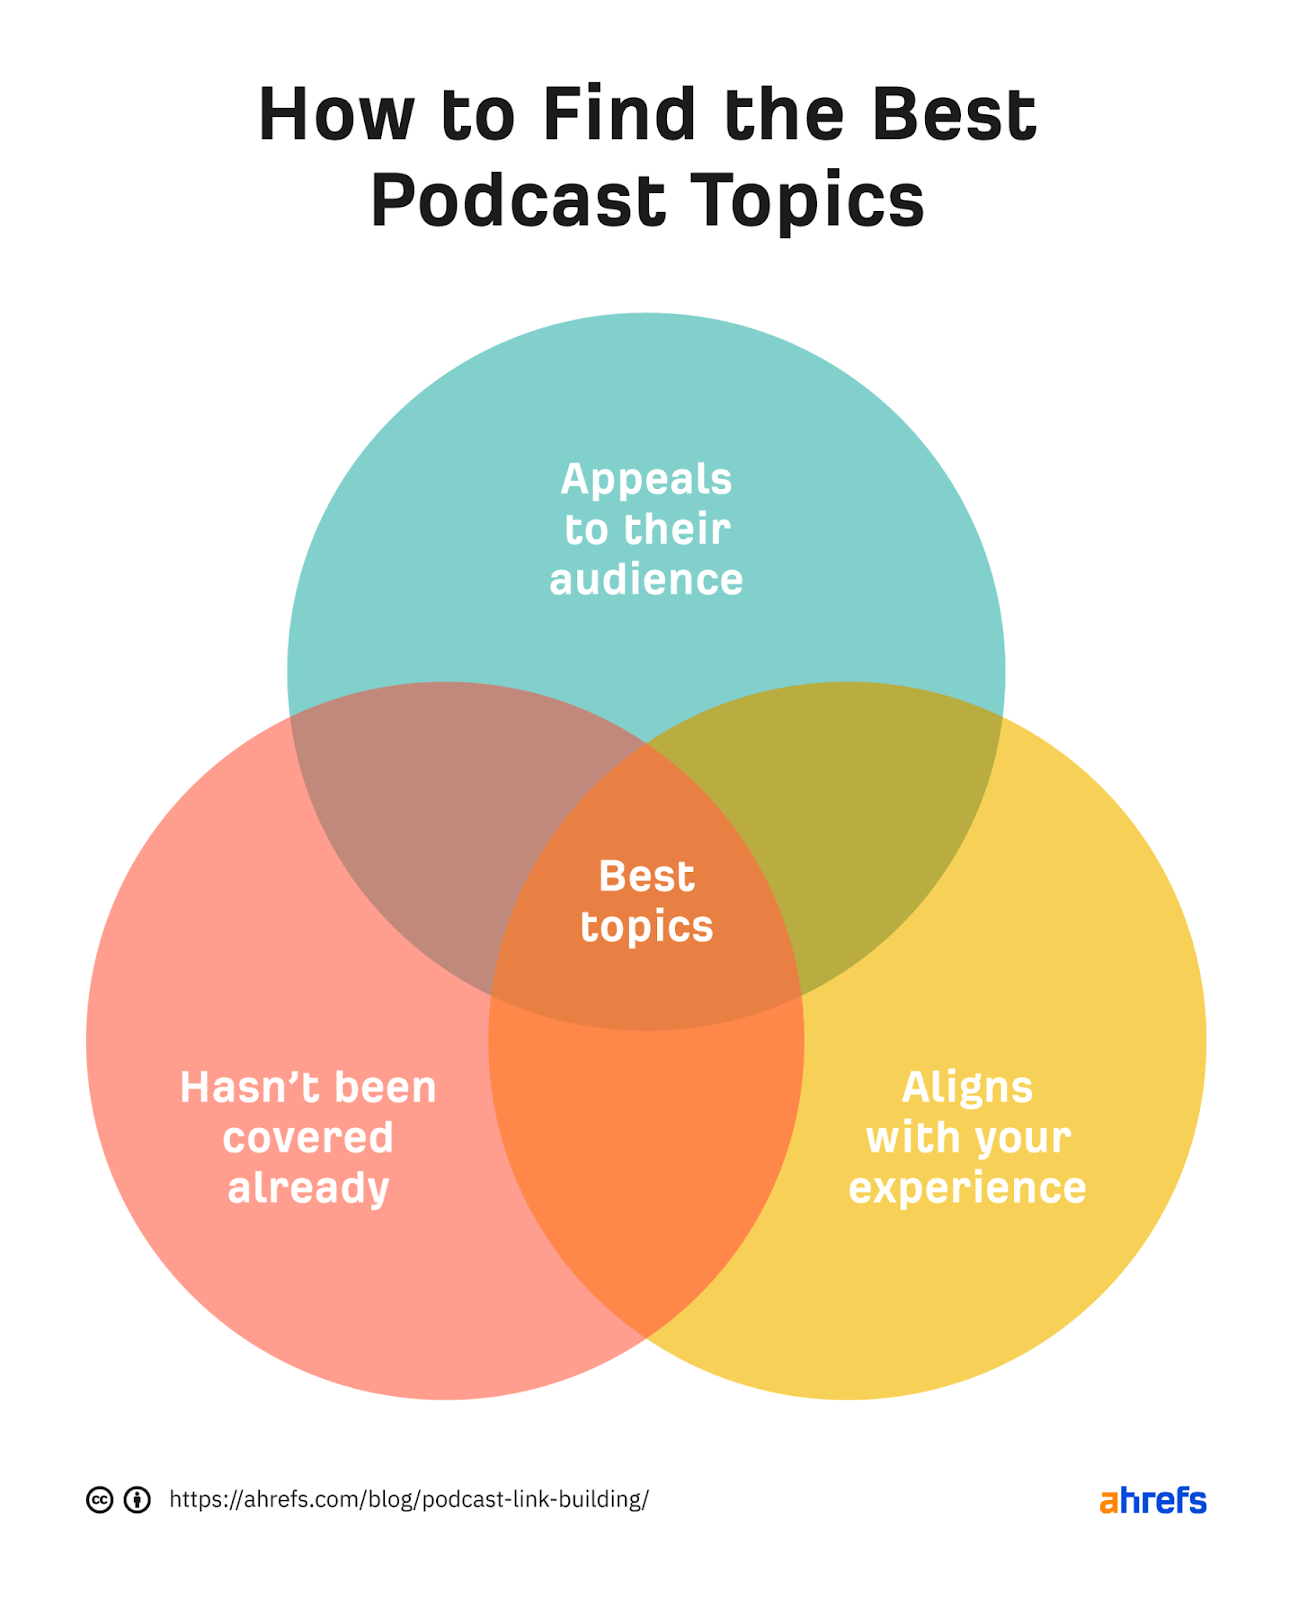 How to find podcast topics